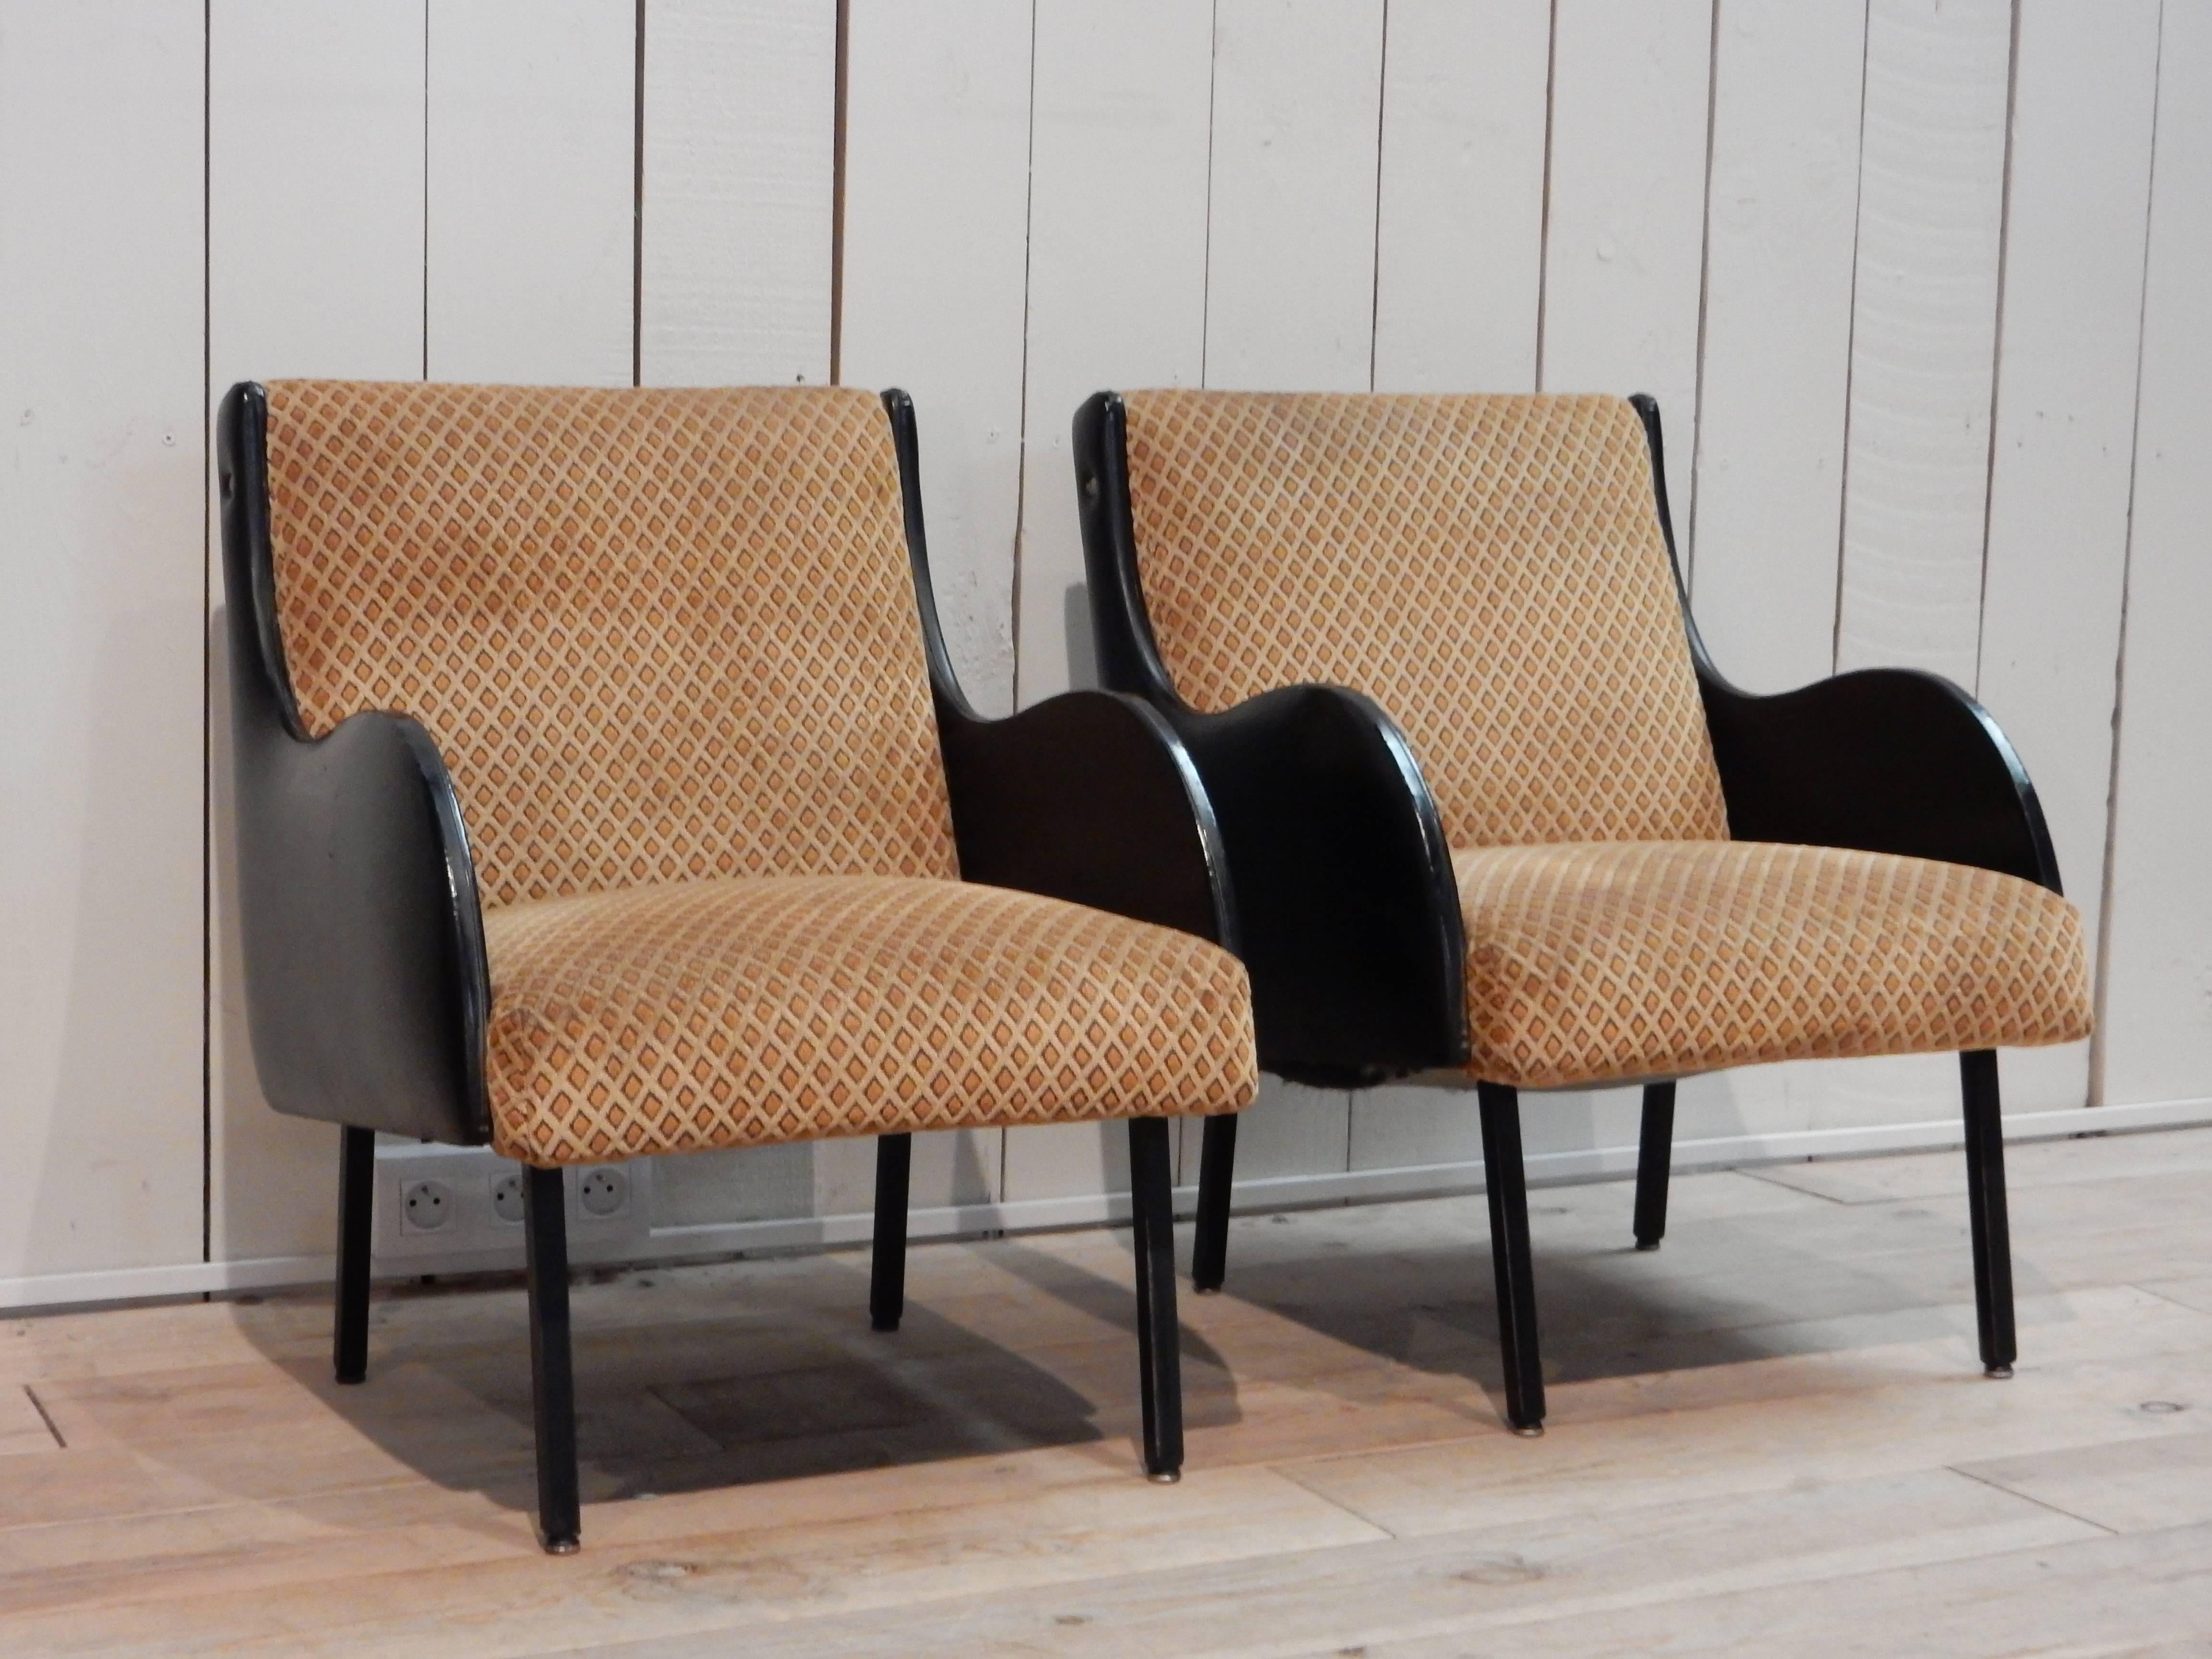 A very nice, interesting and cute small pair of Italian armchair in the style of Gio Ponti created, circa 1960.